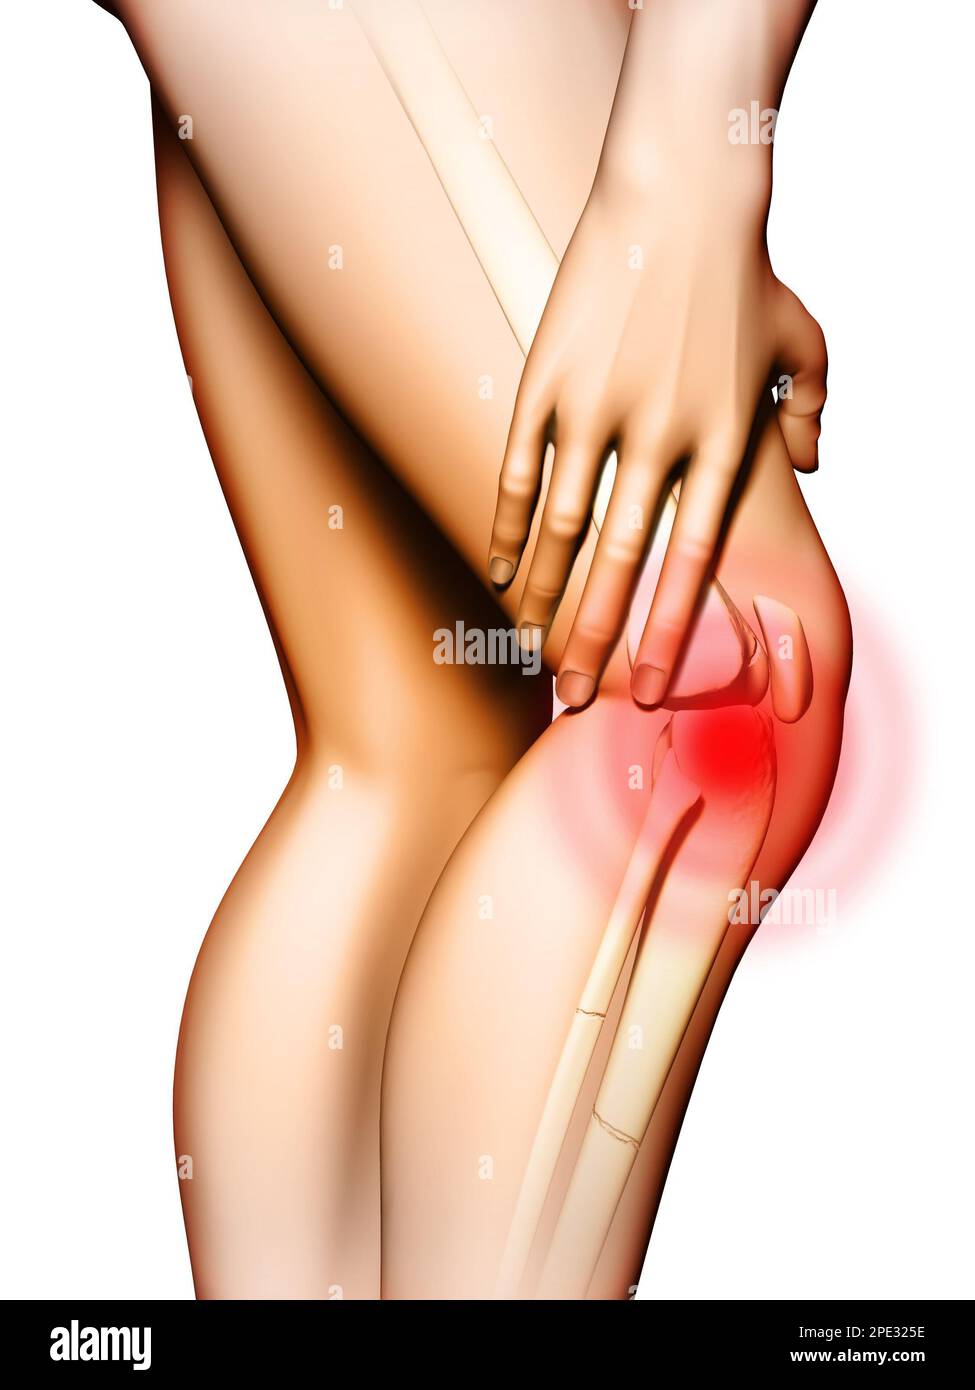 Pain originating in the knee area. Hand touching the upper leg just above the knee. Digital illustration. Stock Photo